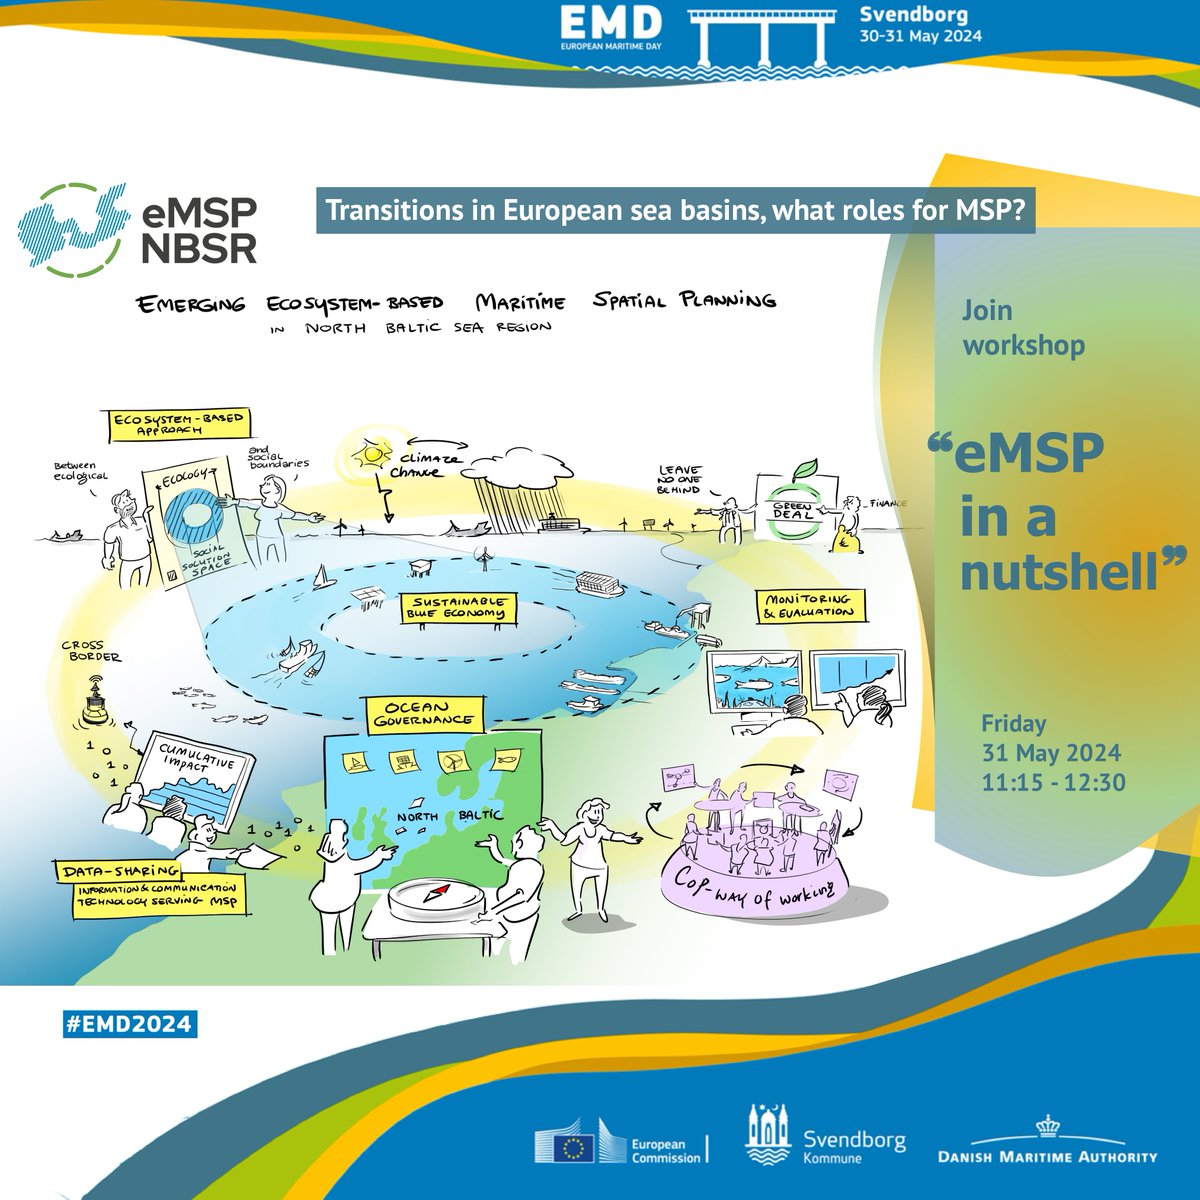 Transitions in 🇪🇺 sea basins - what roles for MSP? To tackle complexities of #GreenDeal in spheres of #nature #energy #food - is adaptive & flexible approach way forward for #MSP? Join our #EMD2024 workshop 'eMSP in a nutshell': t.ly/QM4Yo We meet in Svendborg 🇩🇰👋